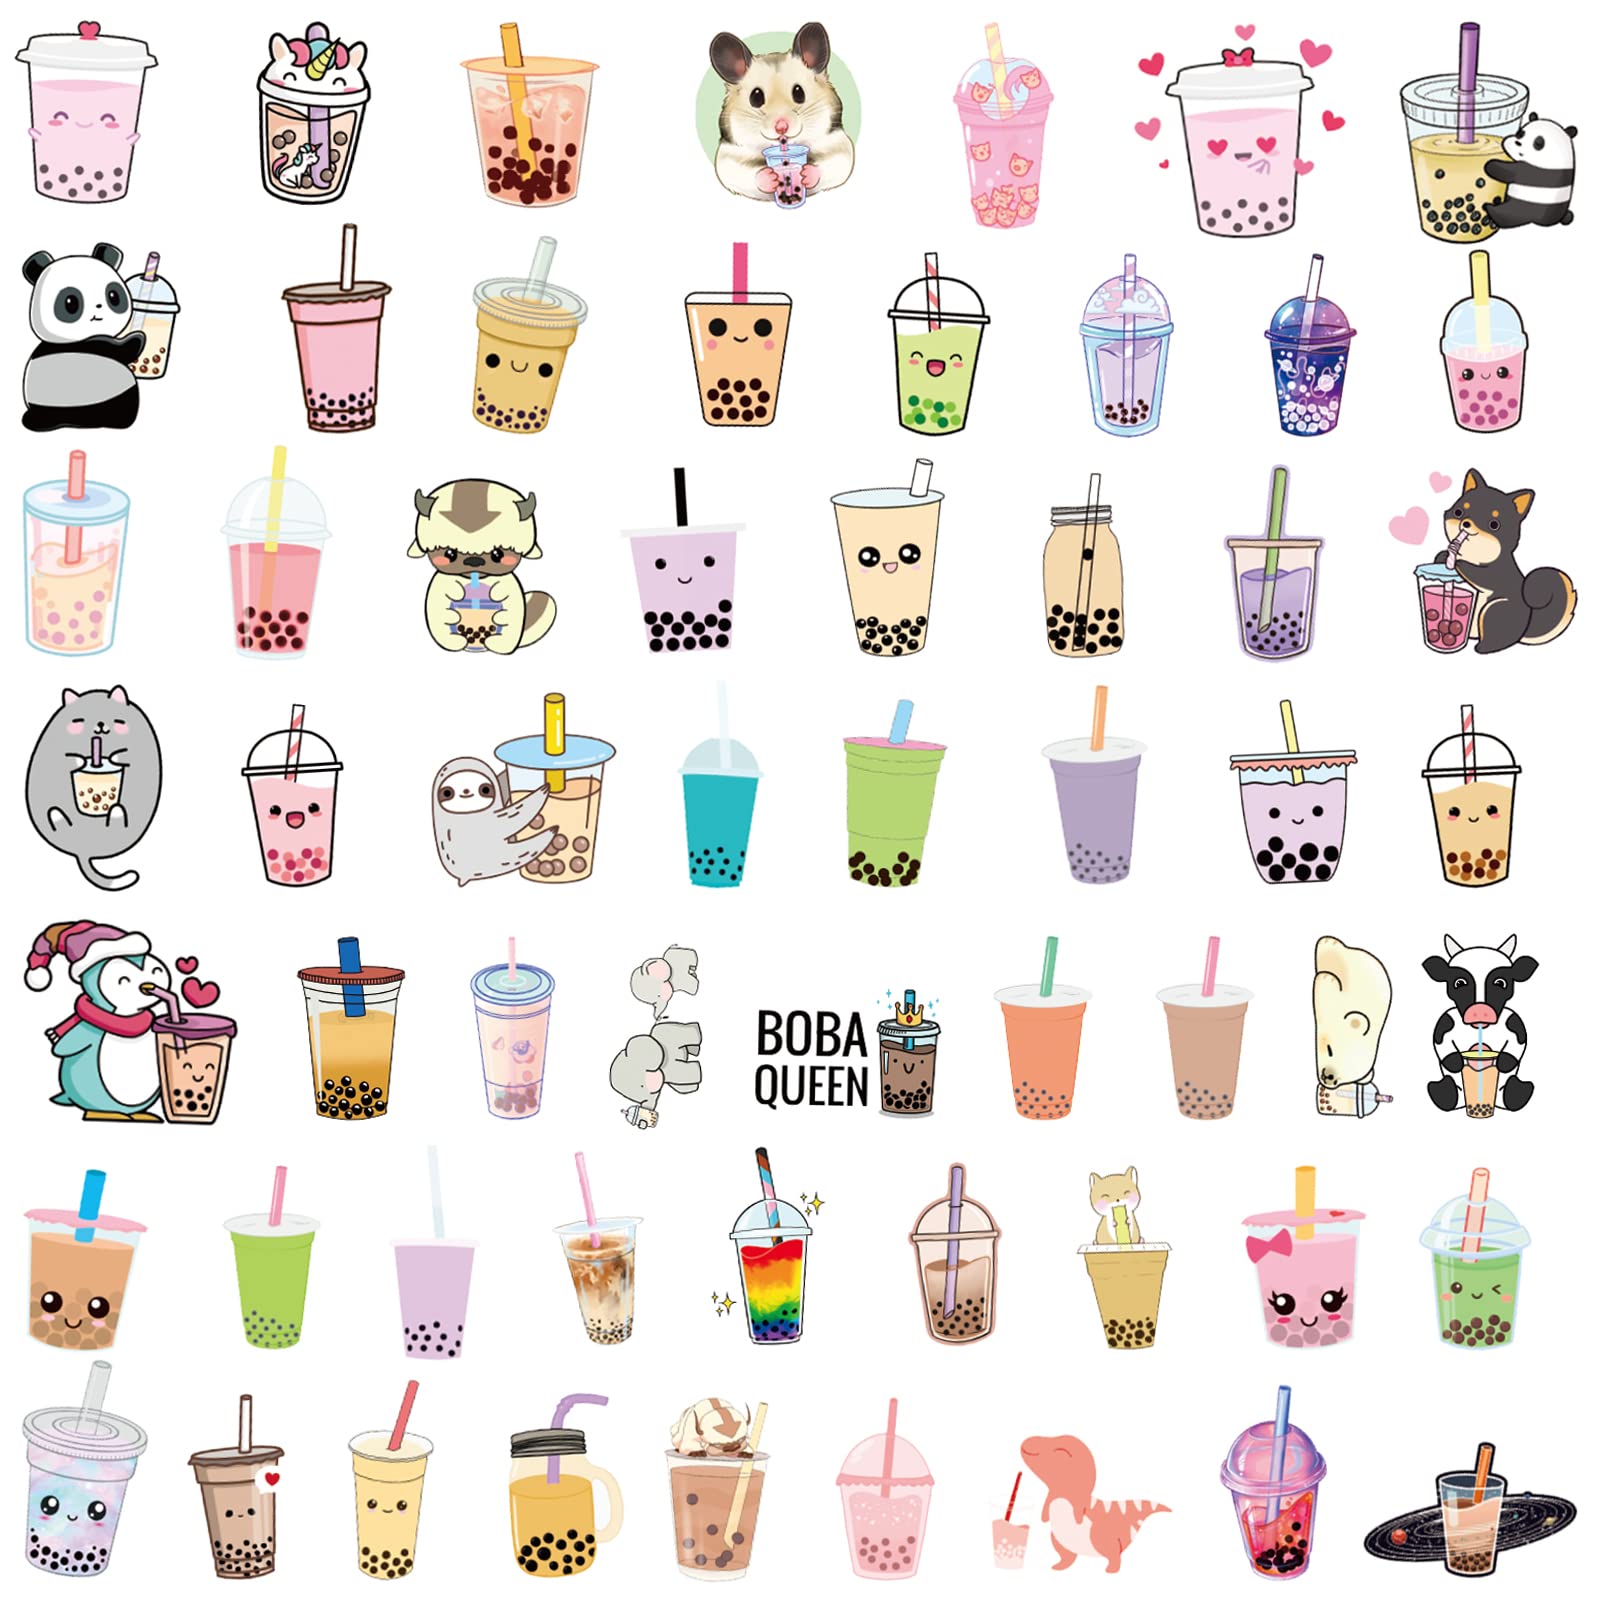 An image of various types of bubble tea. - Boba